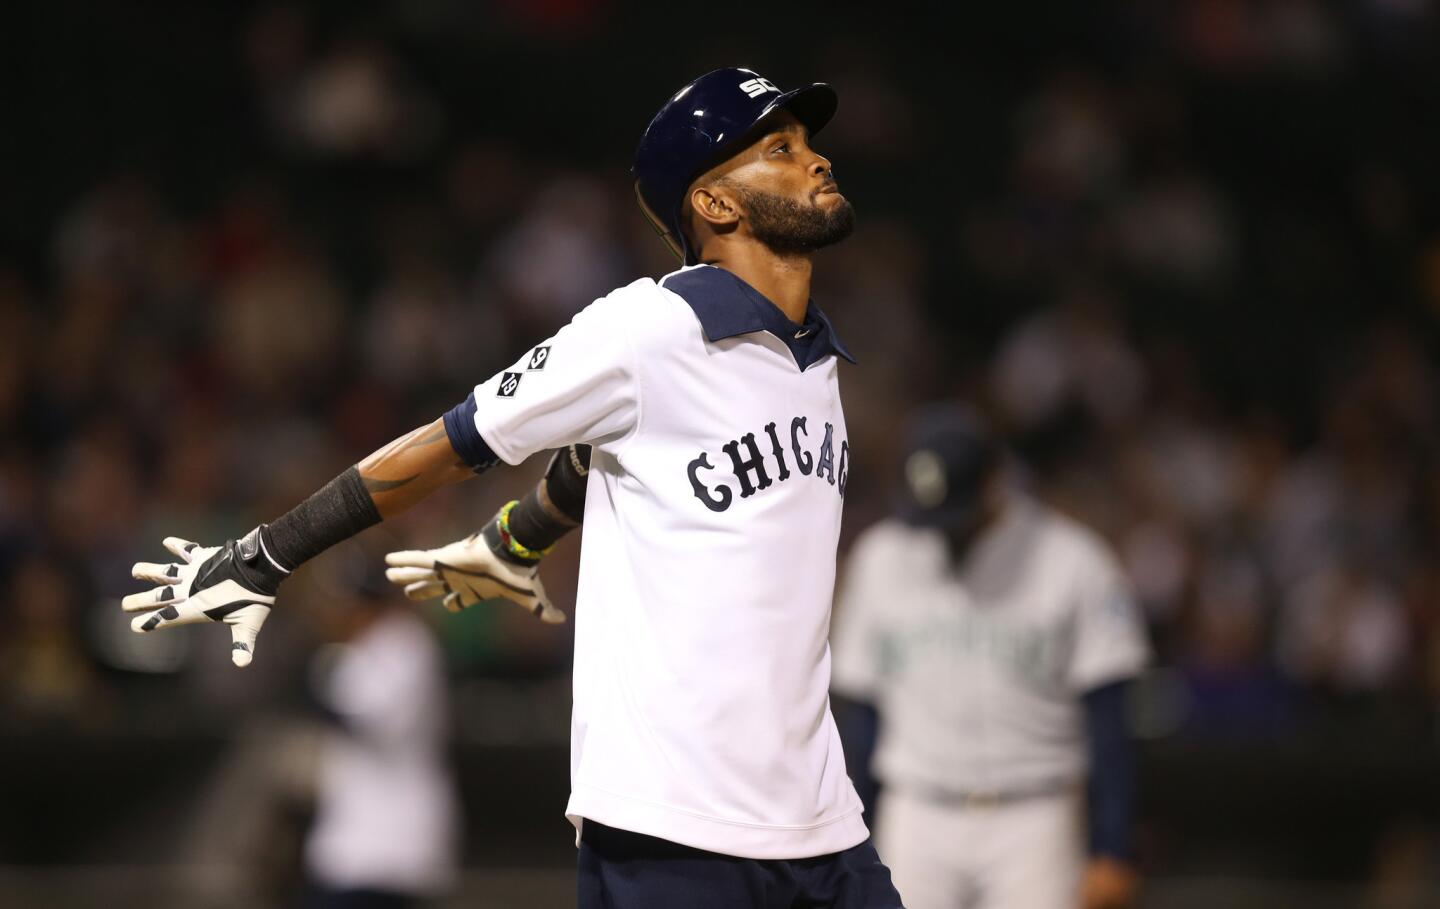 White Sox 4, Mariners 2 - Los Angeles Times